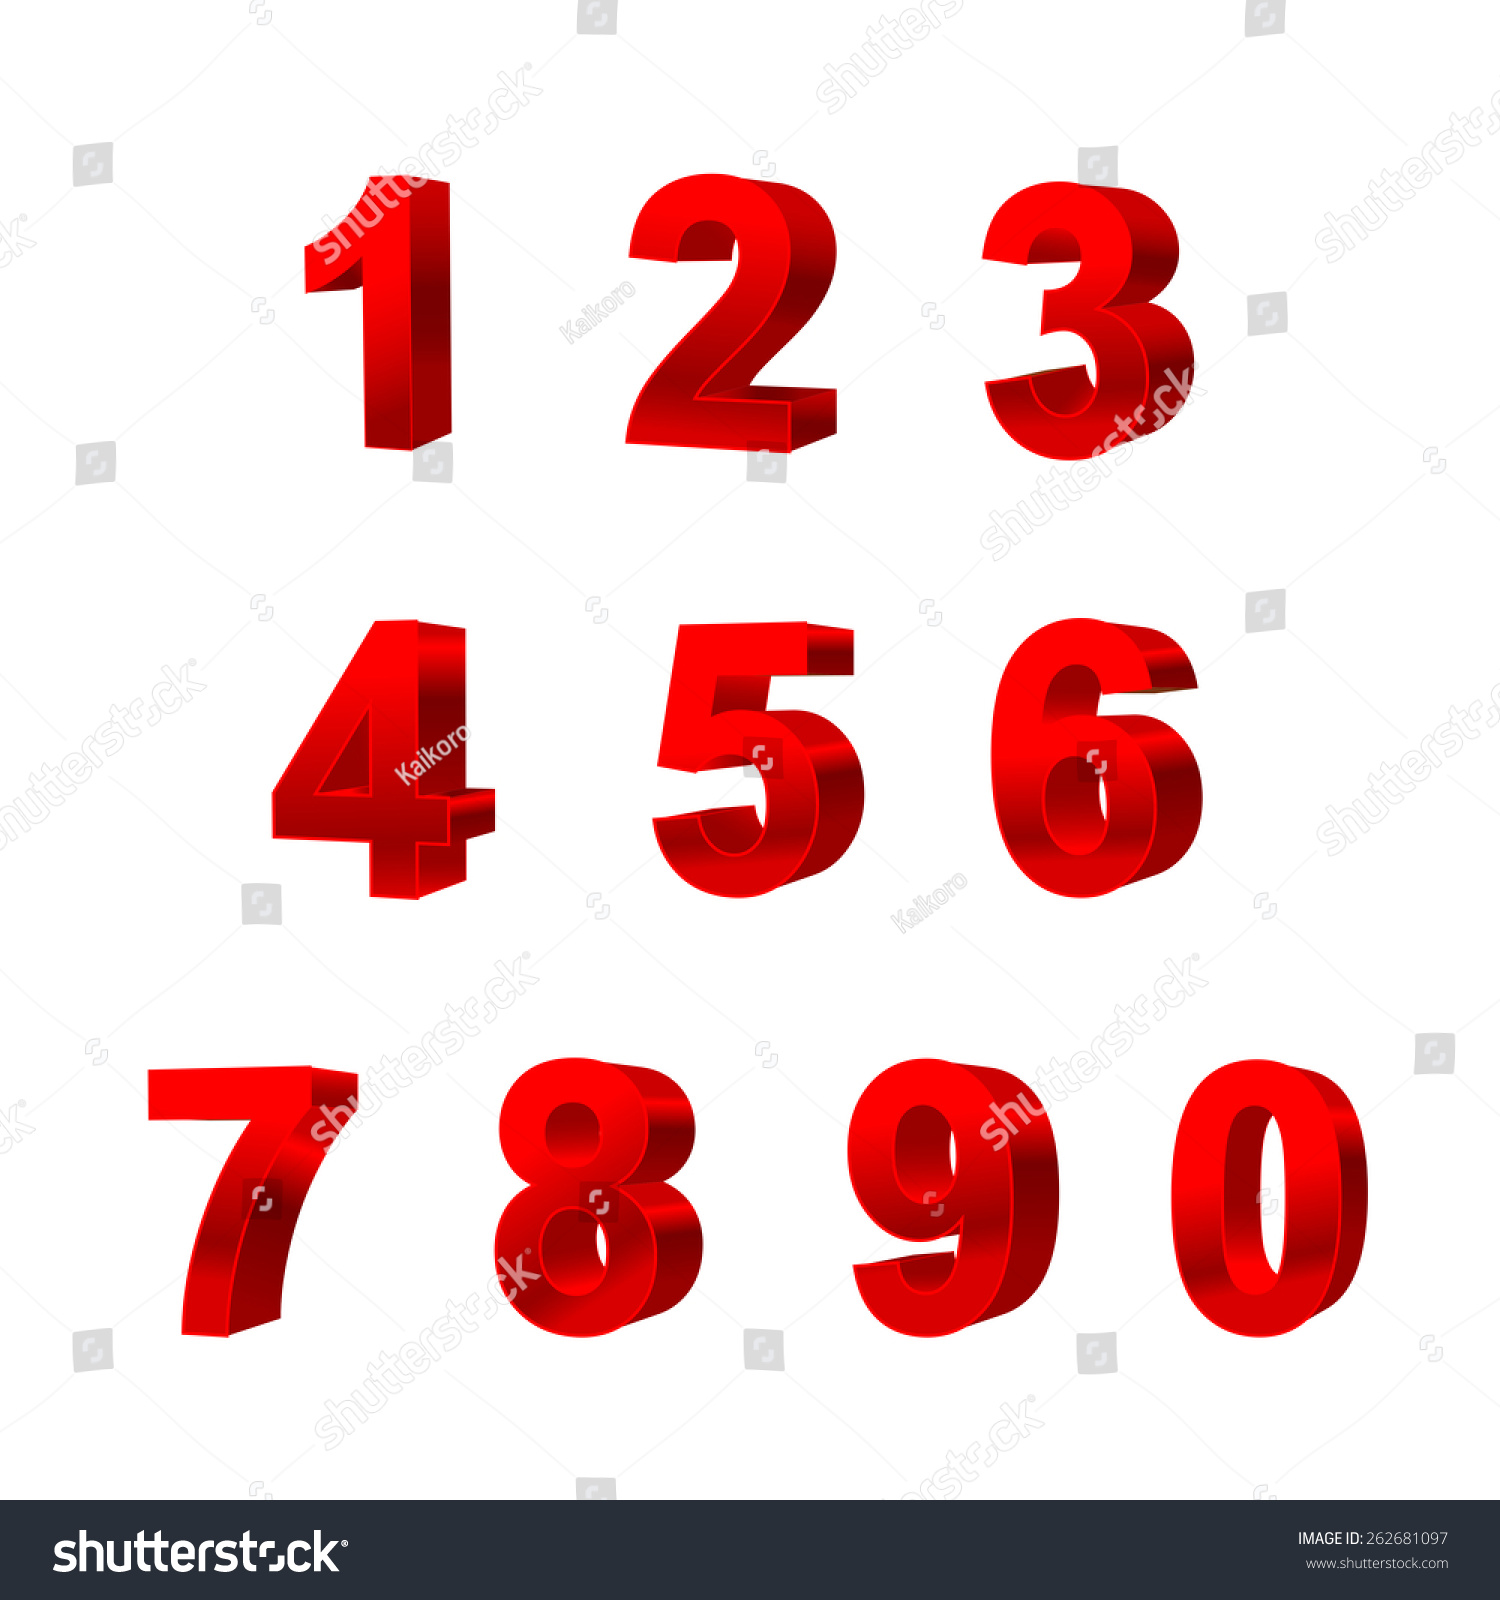 collection of numbers isolated on white background 3D vector illustration #262681097